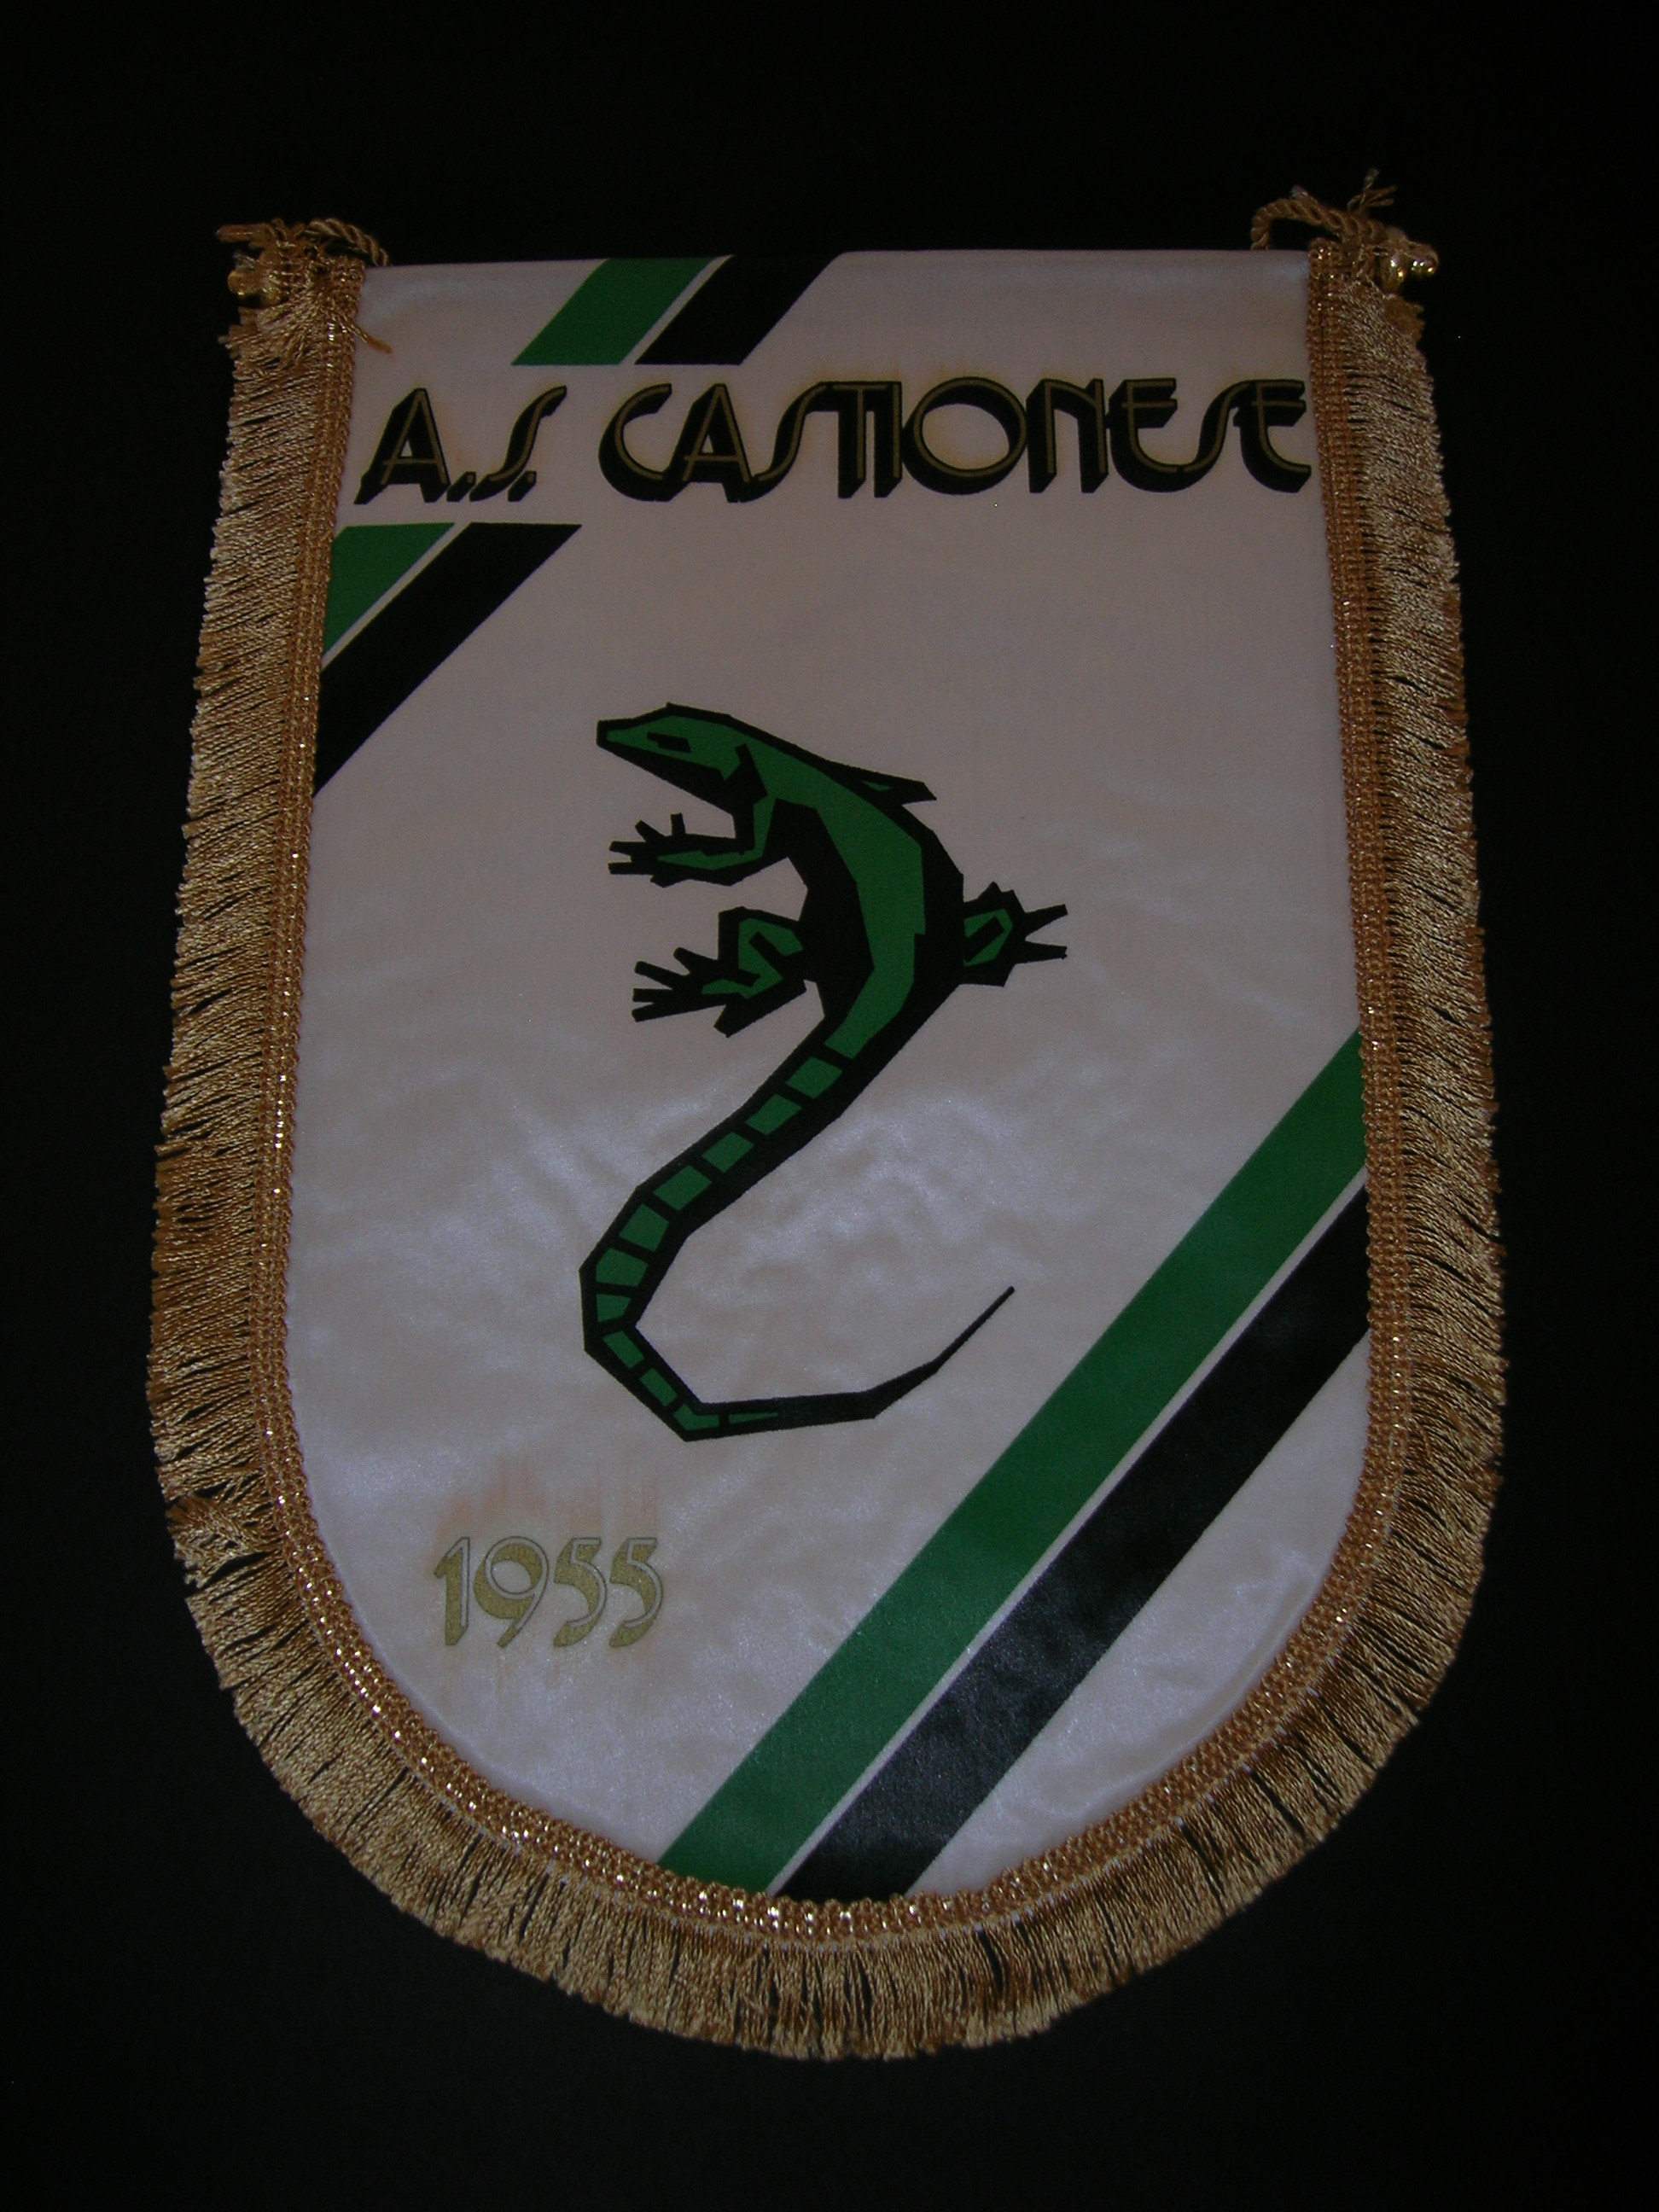 A S.  Castionese  222